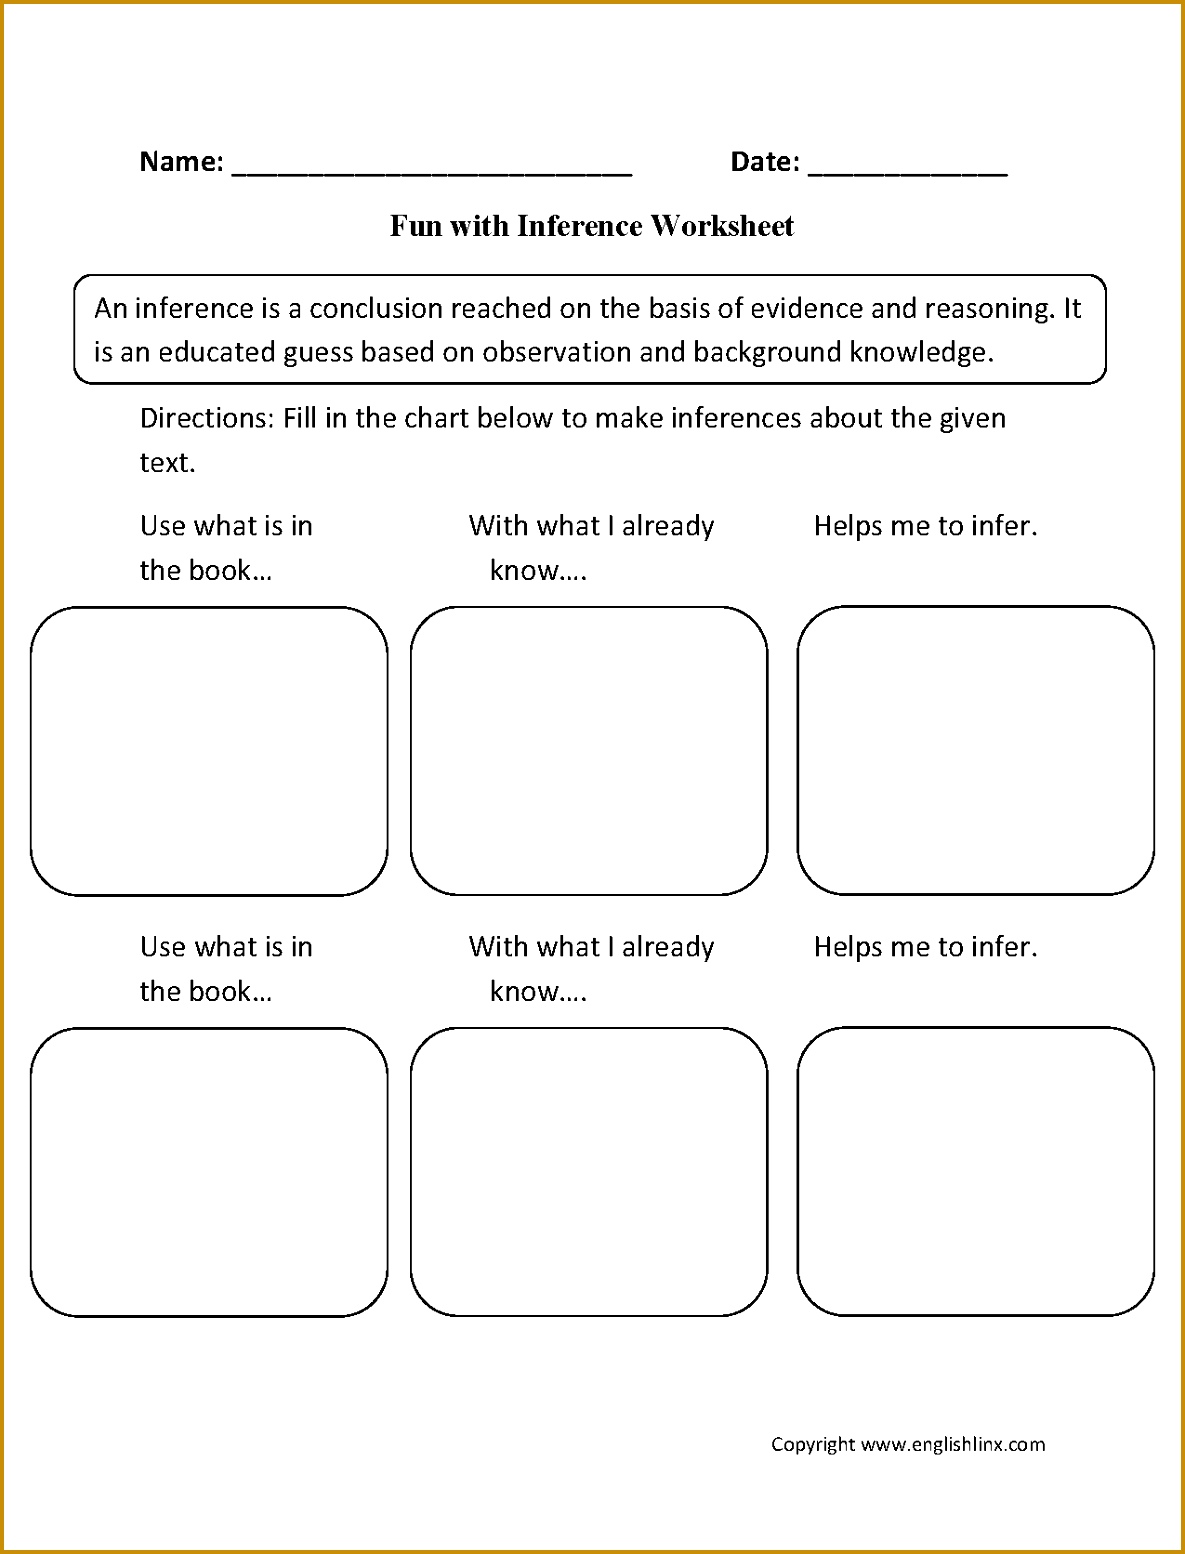 Fun with Inference Worksheets 15541185